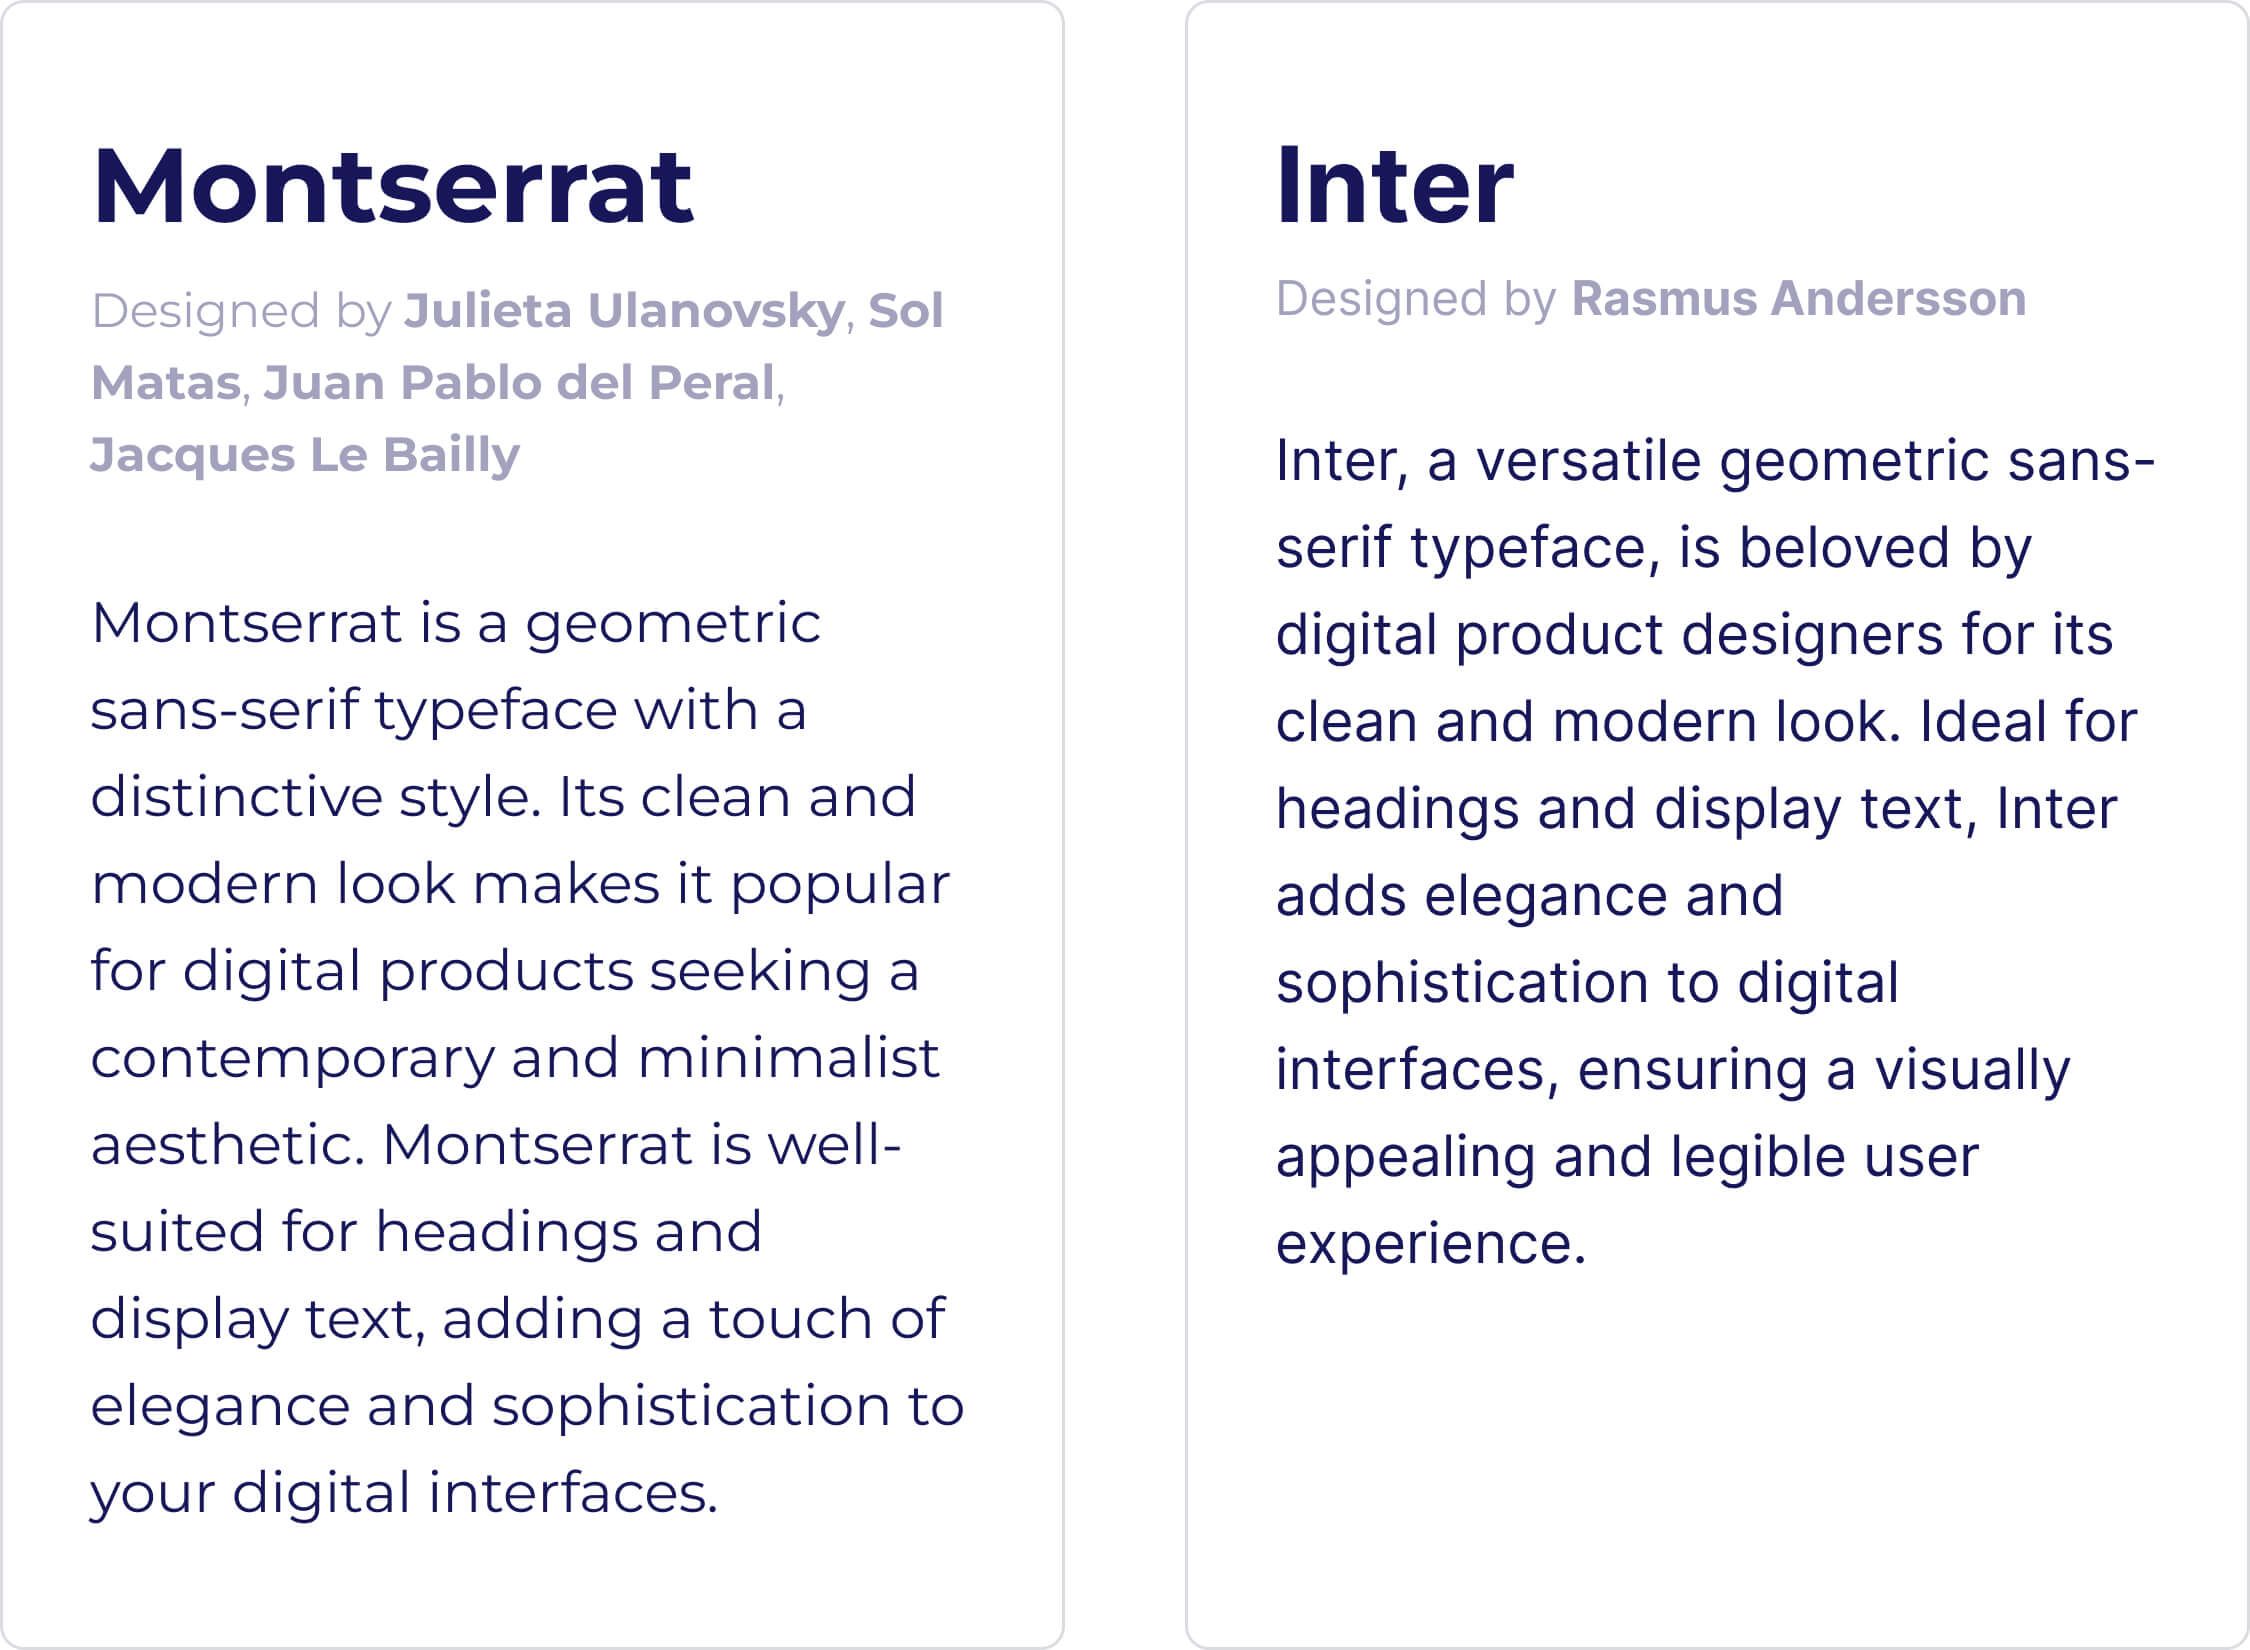 an example of text in montserrat & inter typefaces, best for use in digital products